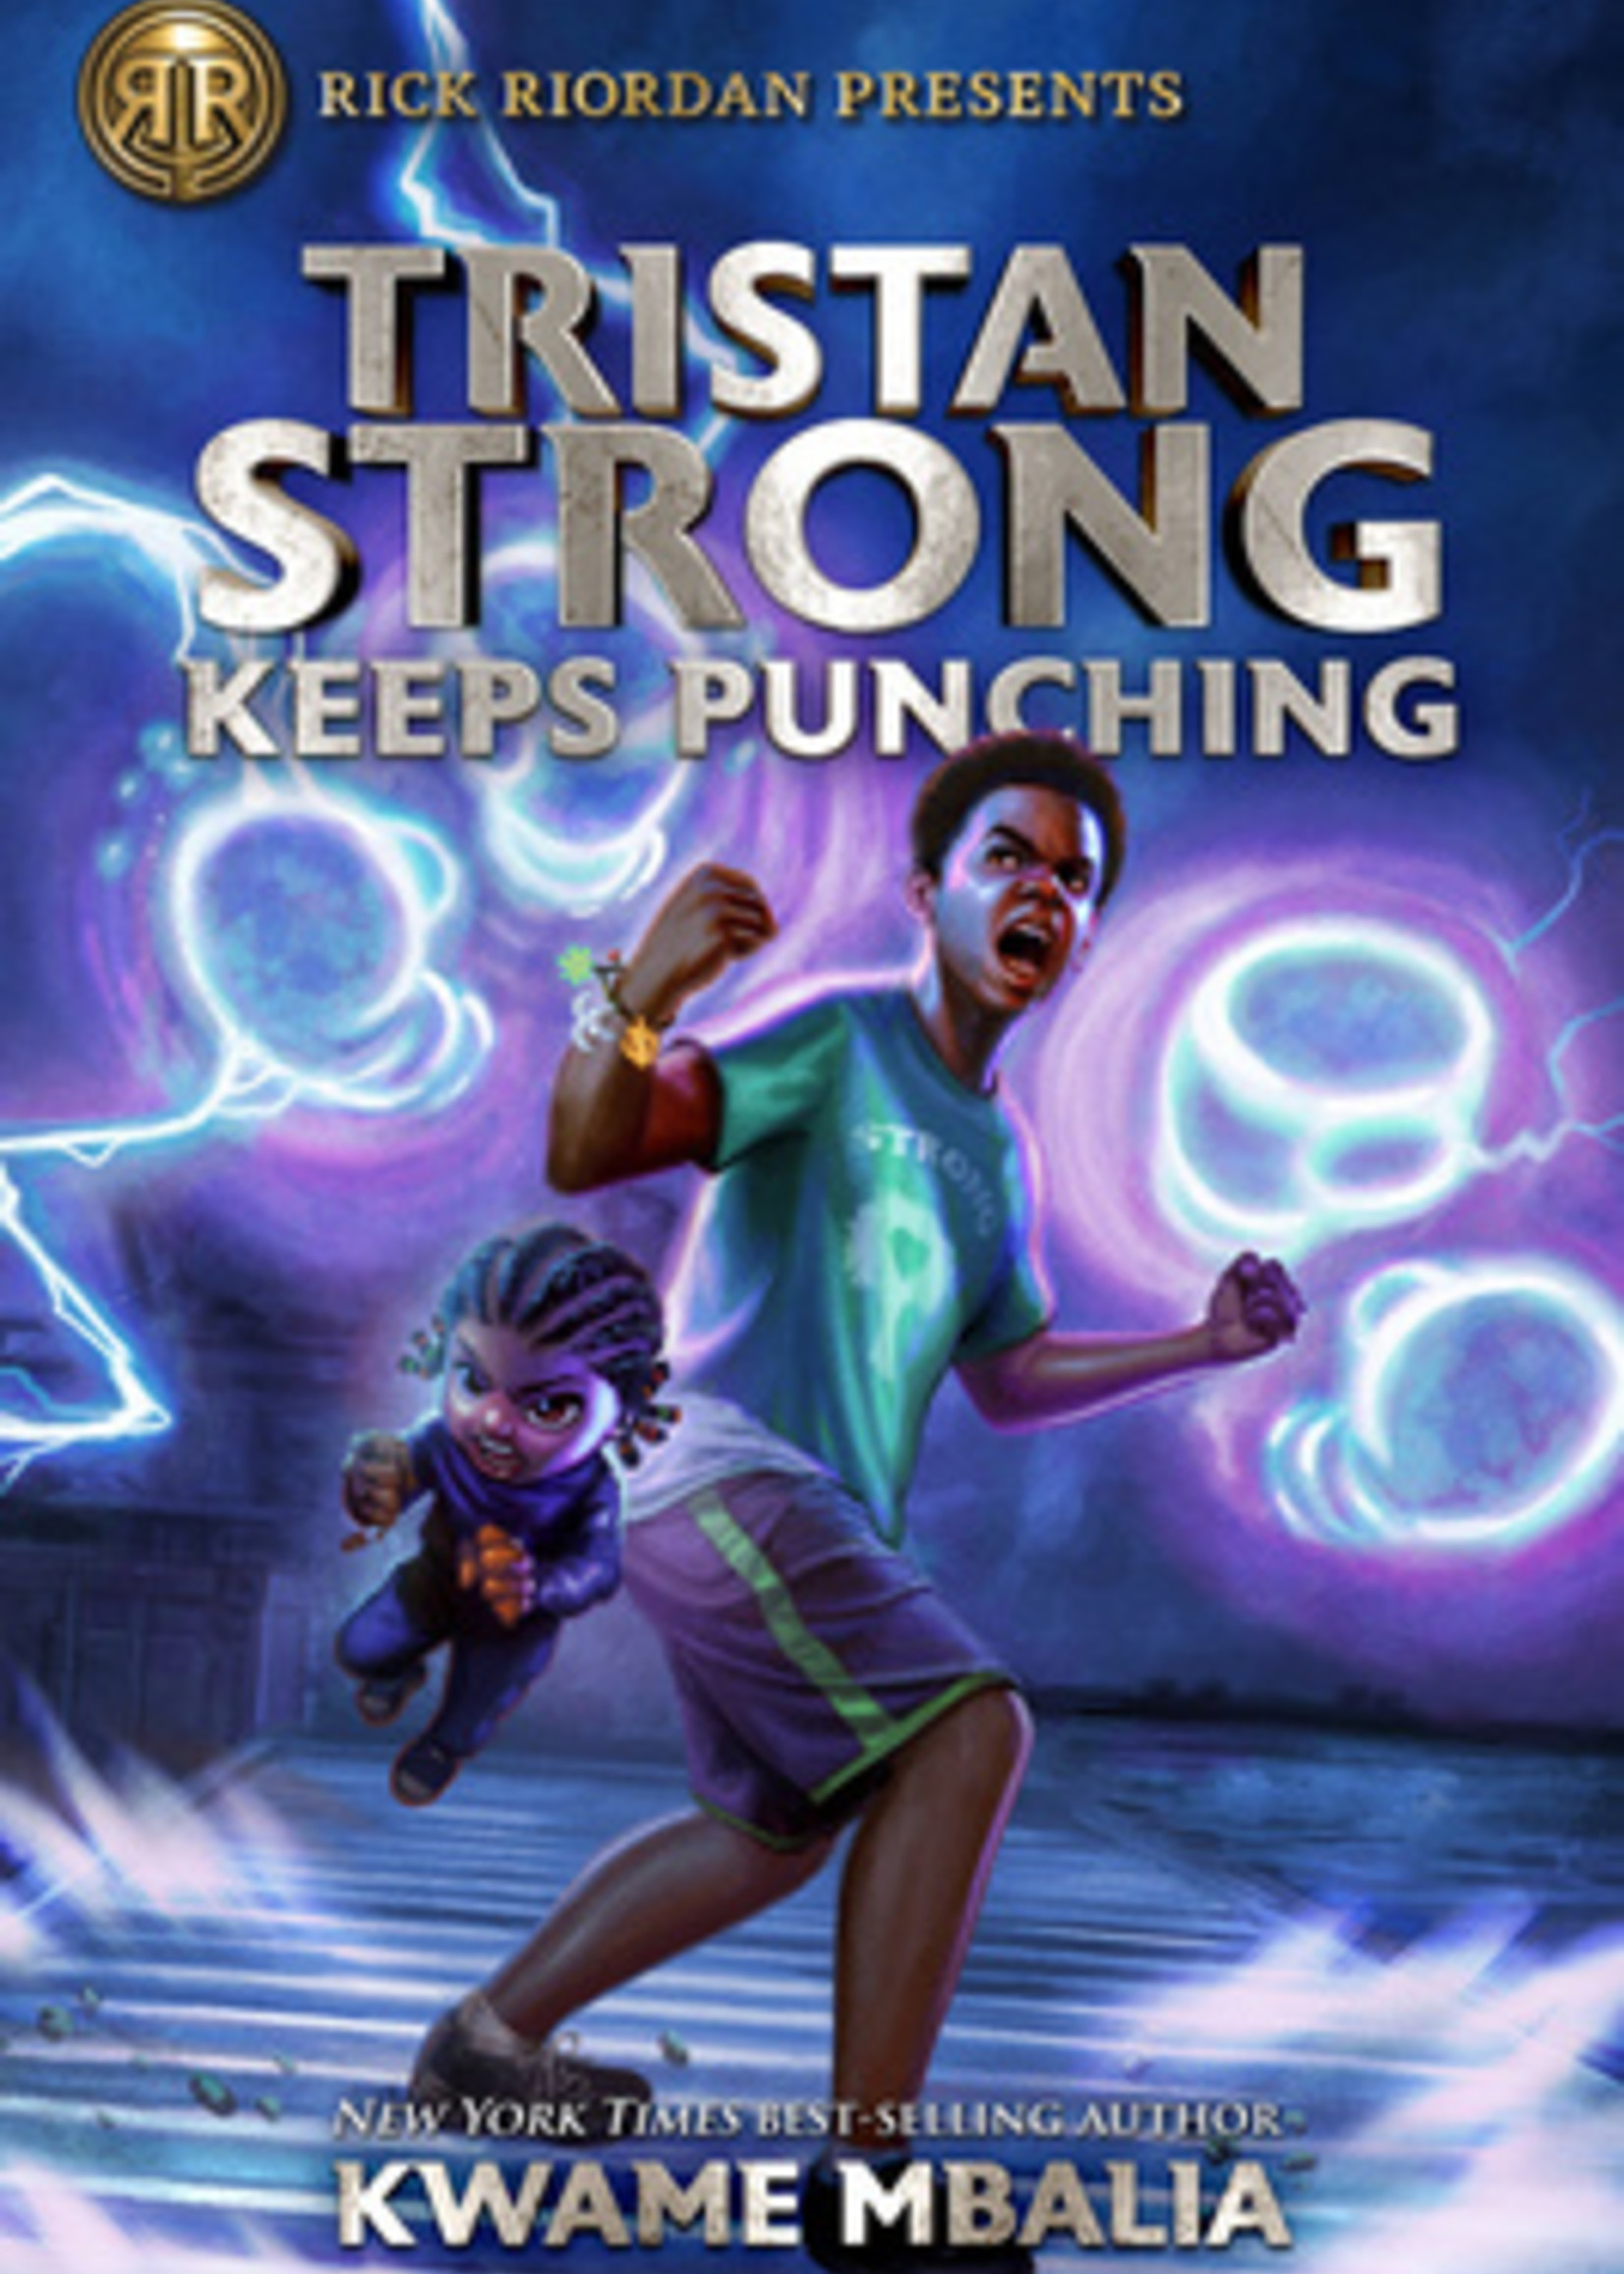 Rick Riordan Presents: Tristan Strong #03, Tristan Strong Keeps Punching - Hardcover